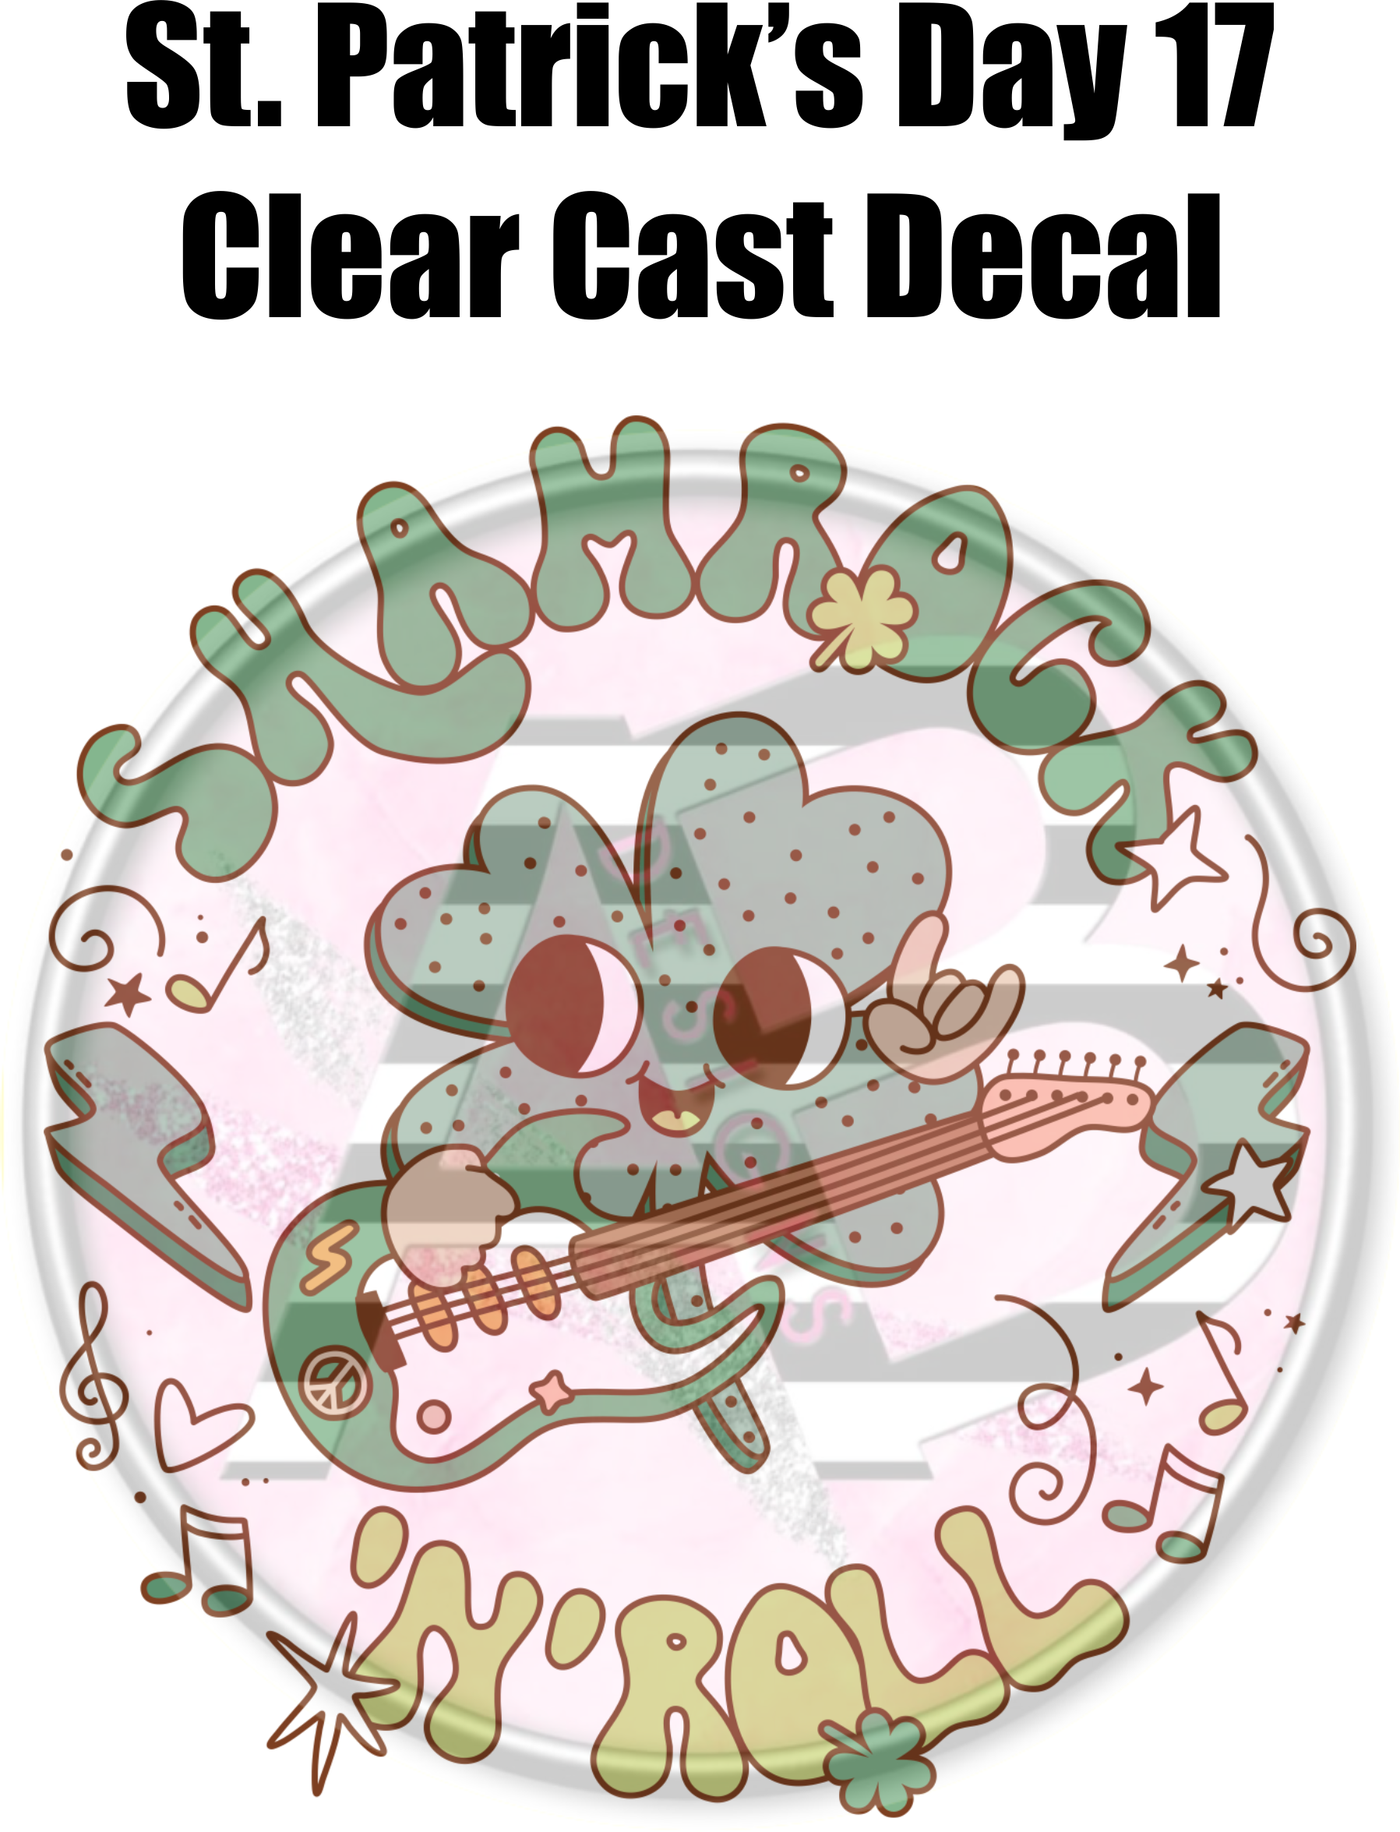 St. Patrick's Day 17 - Clear Cast Decal